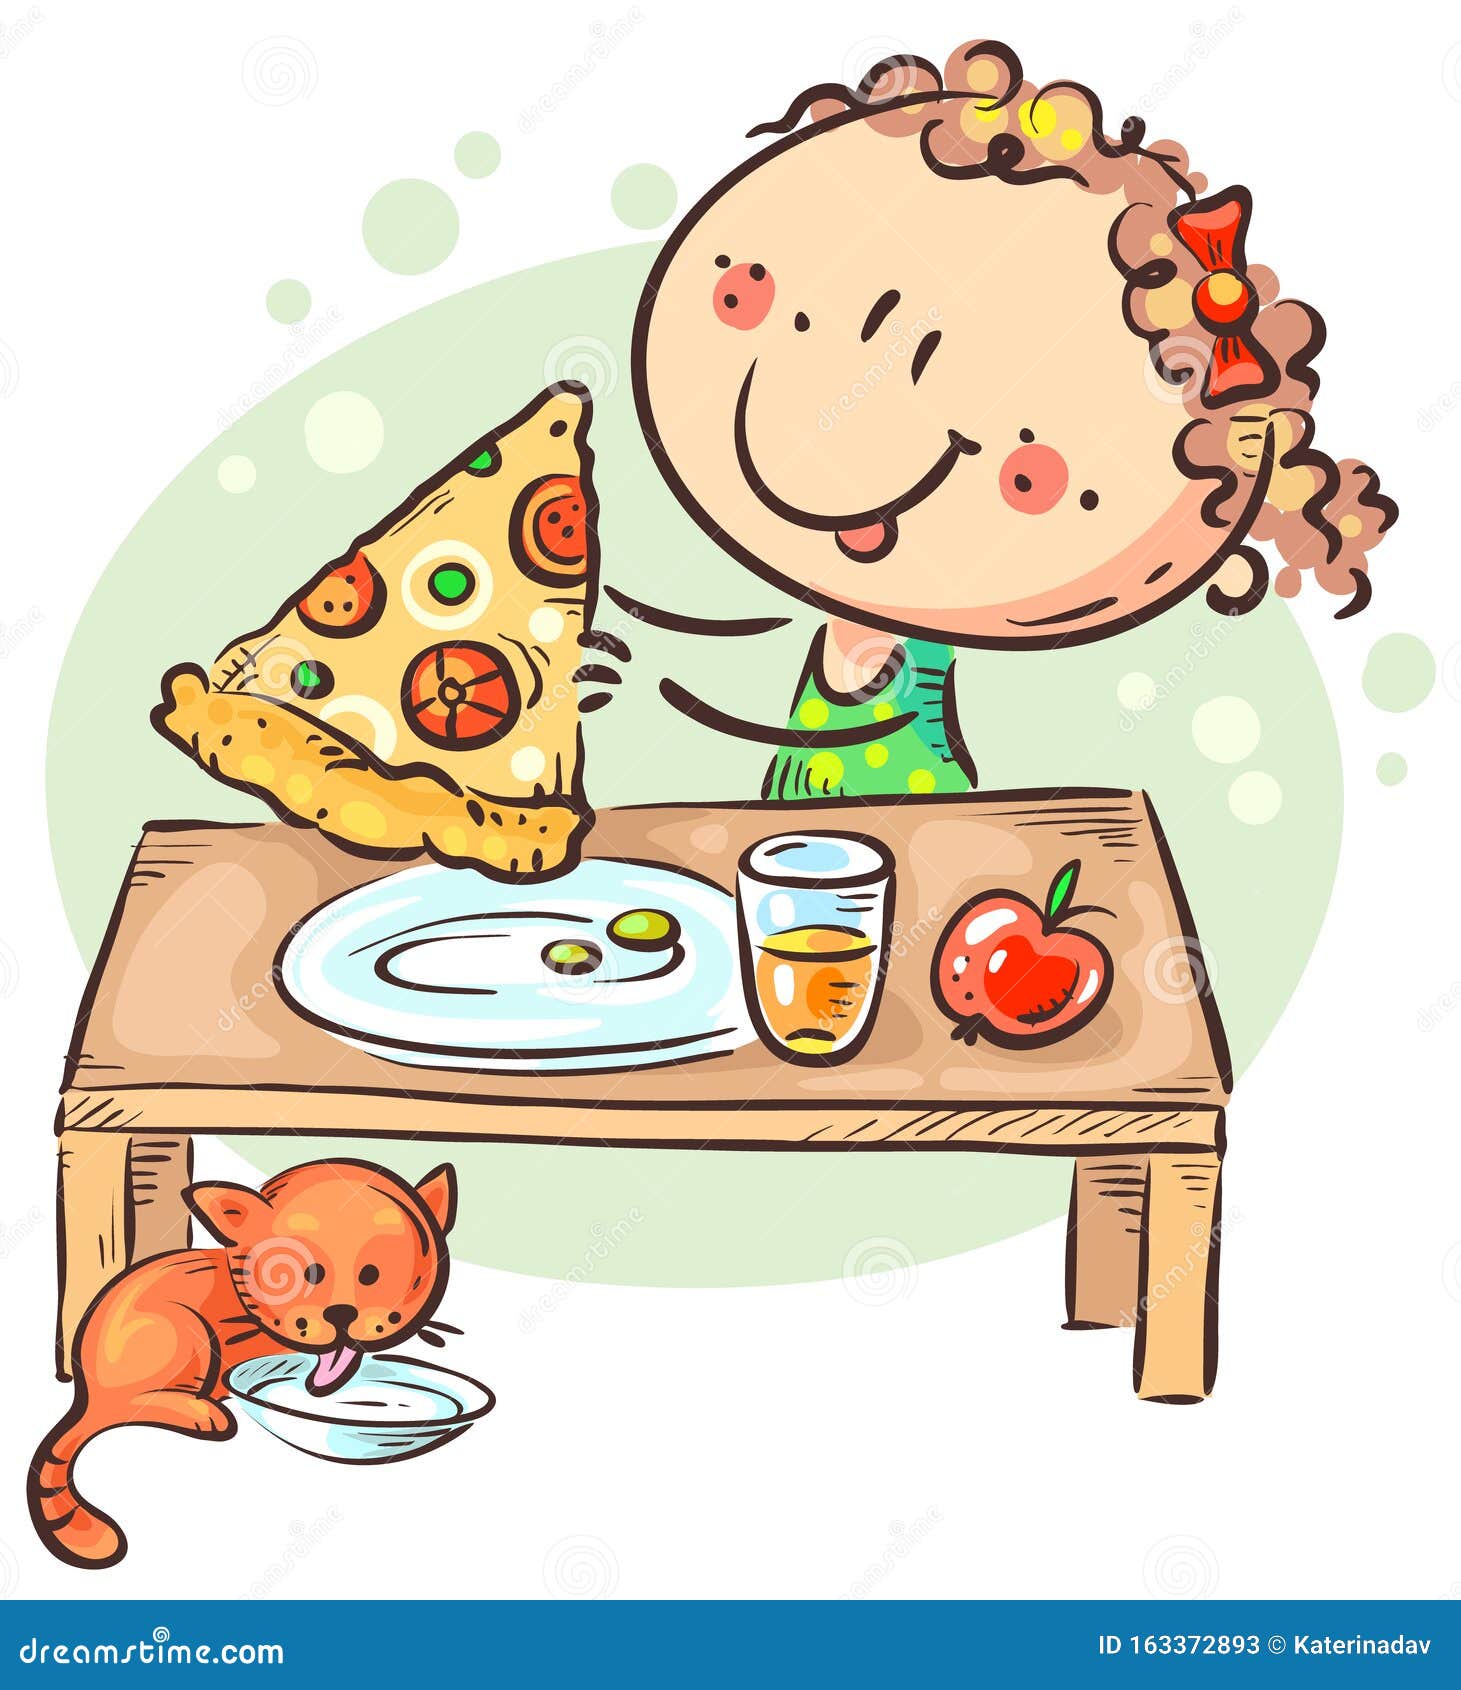 little girl eating pizza, having a snack or meal